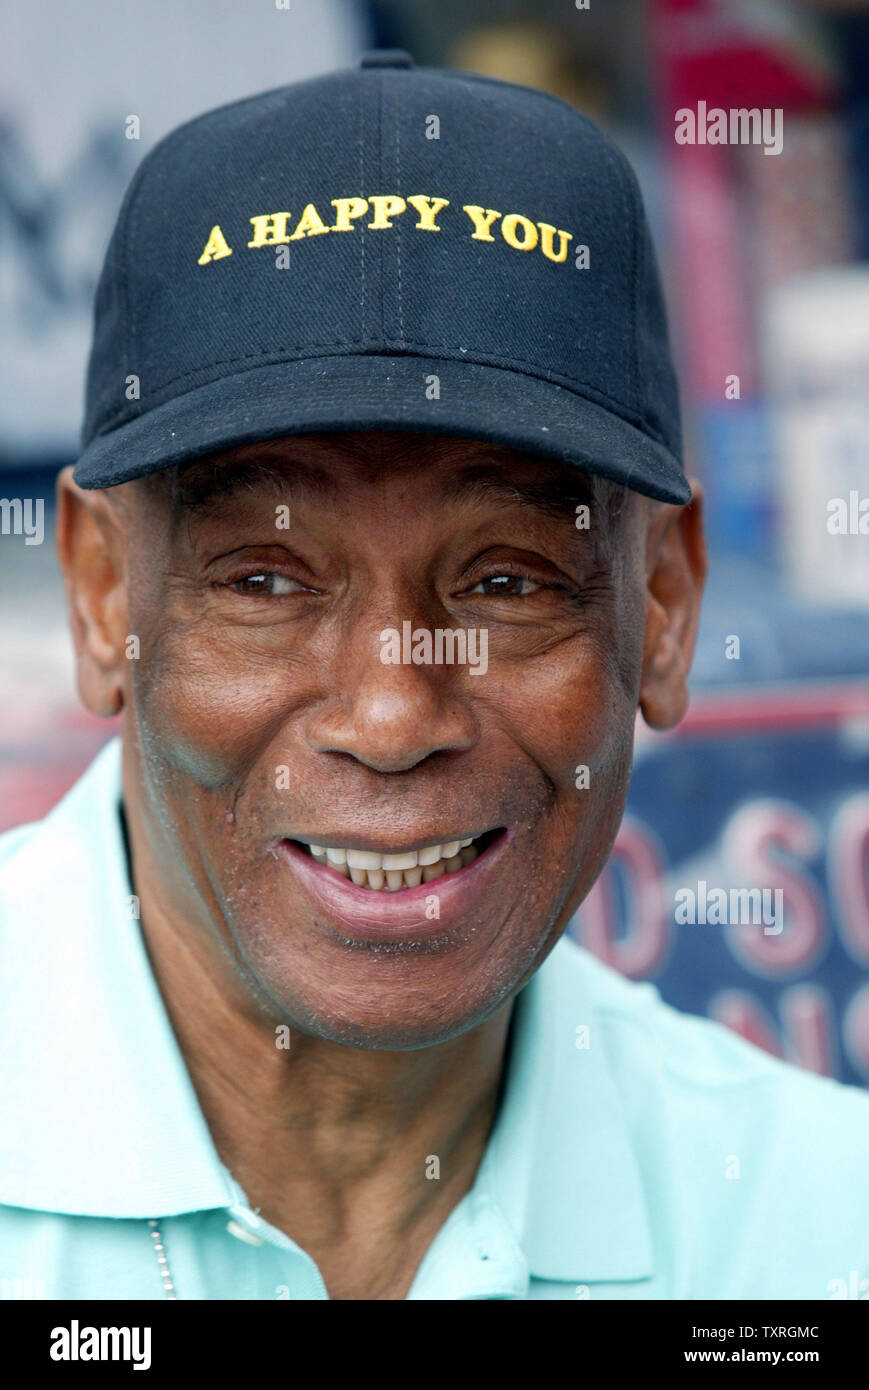 Ernie banks hi-res stock photography and images - Alamy